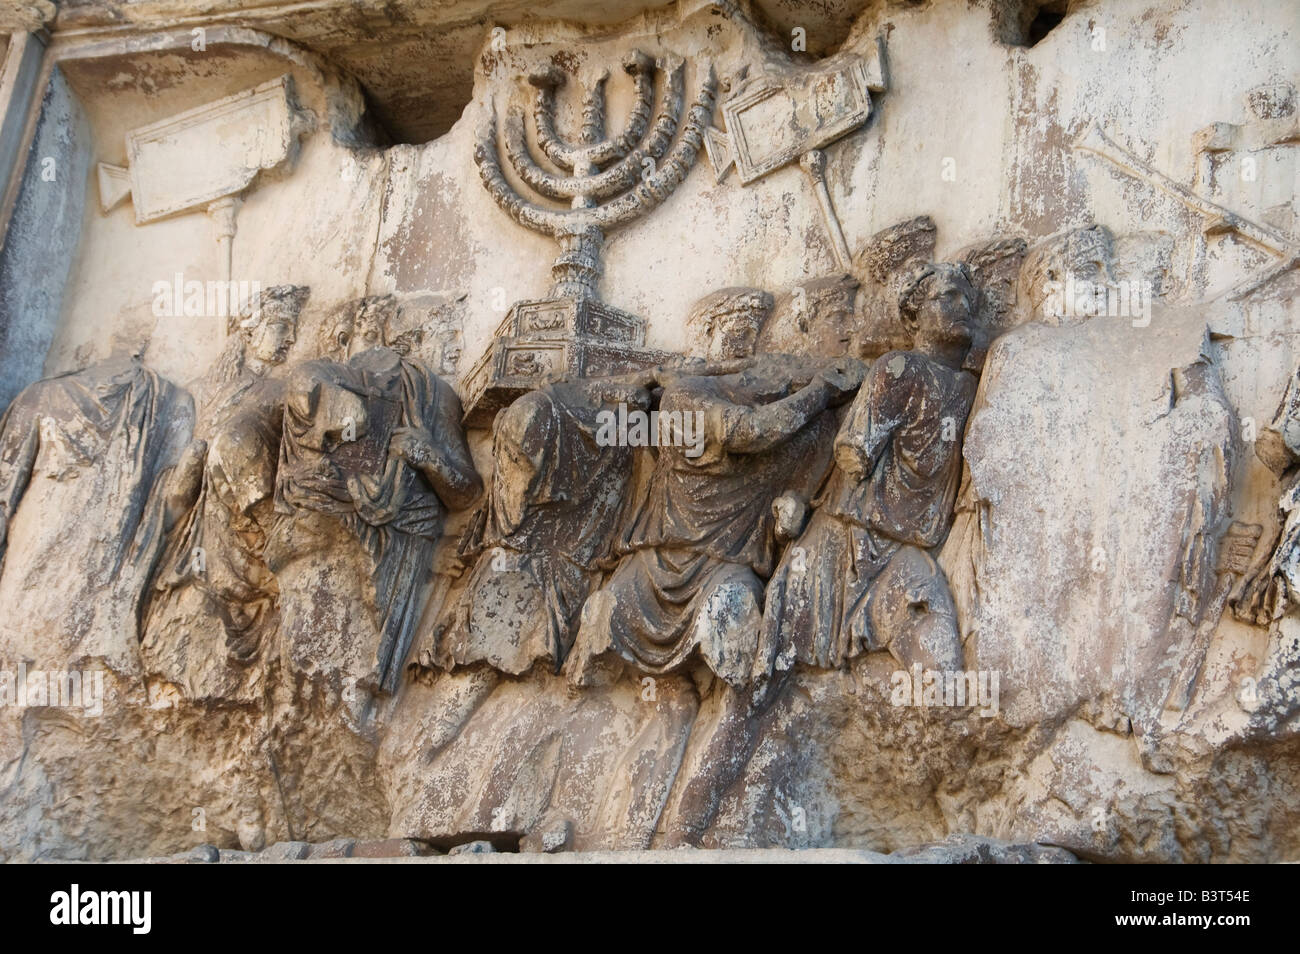 Relief depicts spoils taken from the Temple in Jerusalem carved at the south inner panel of Titus arch in the ancient Roman forum site, Rome Italy Stock Photo